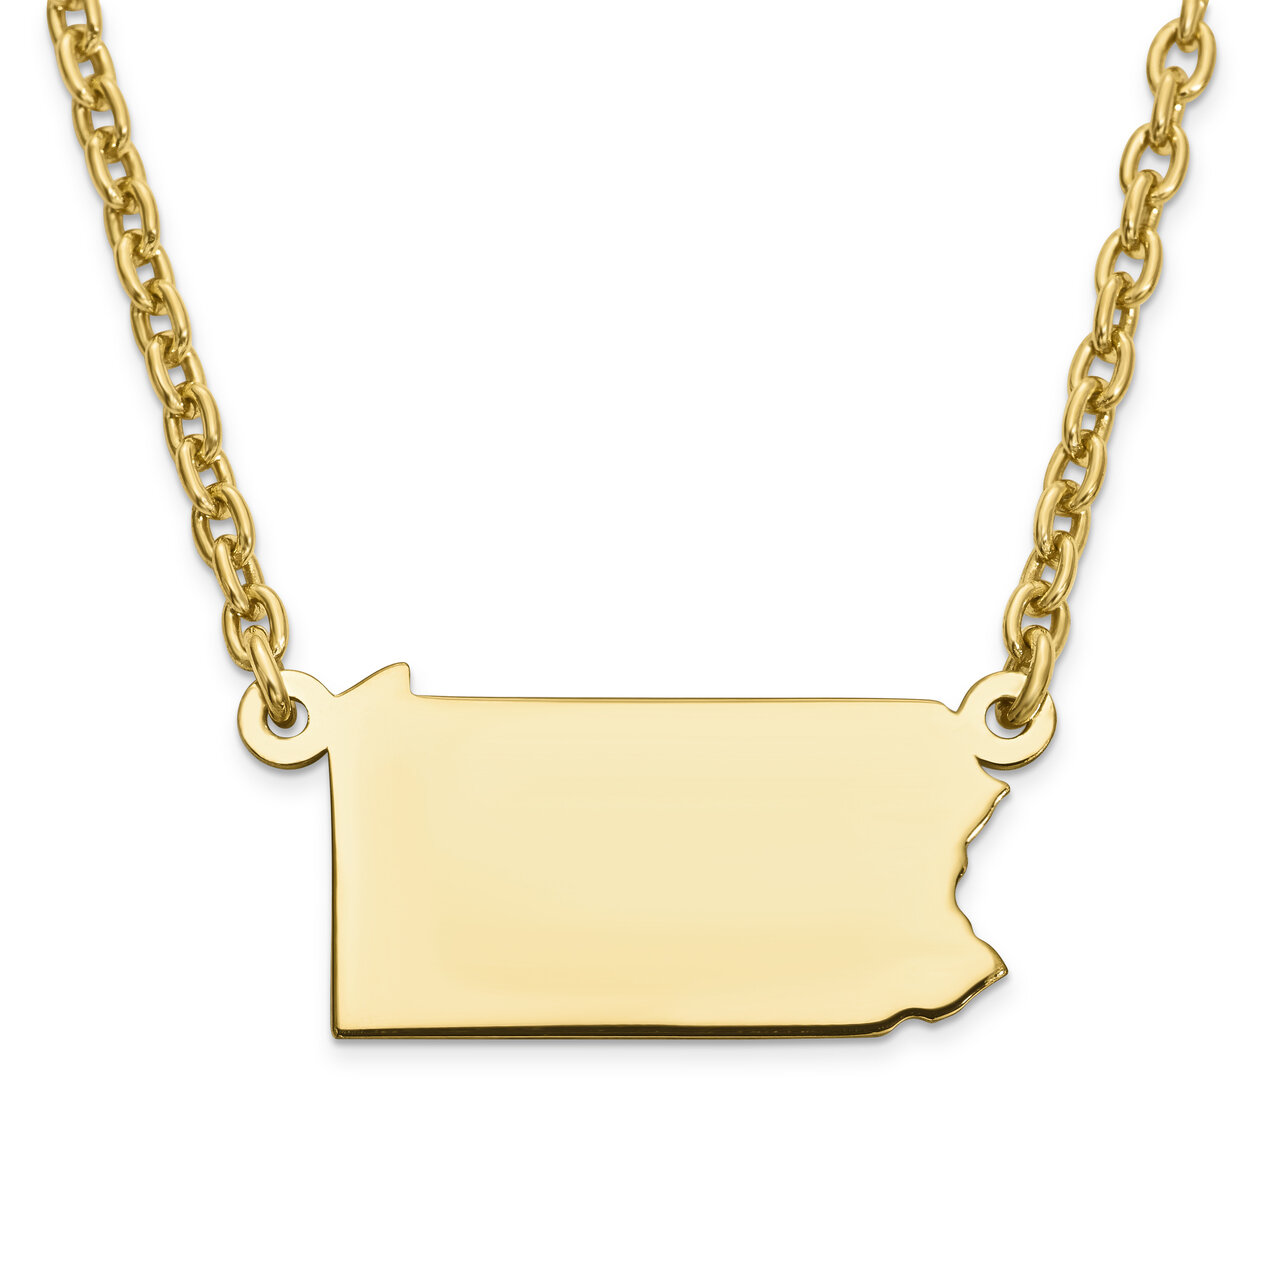 Pennsylvania State Pendant Necklace with Chain 14k Yellow Gold Engravable XNA706Y-PA